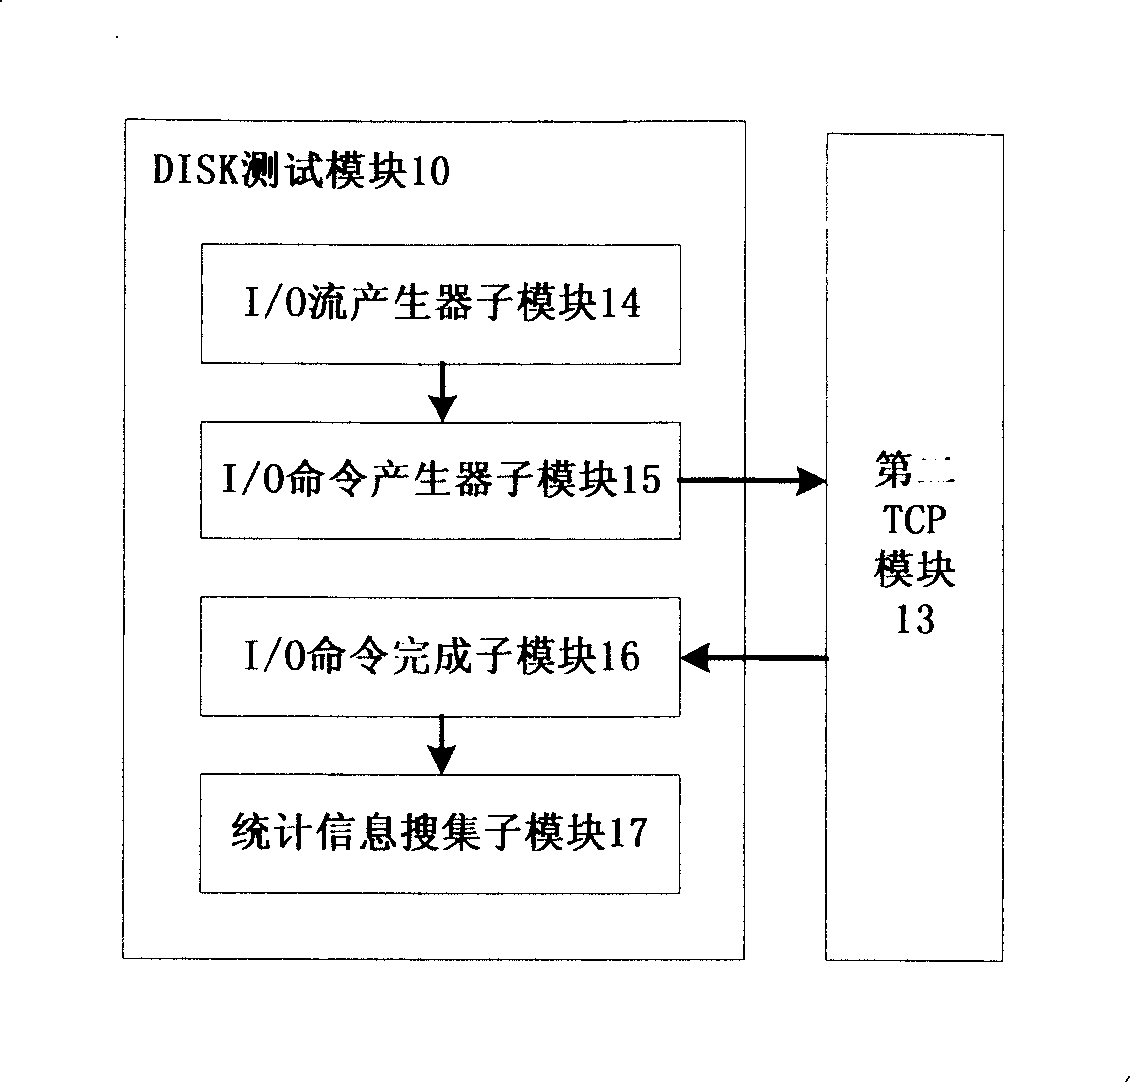 Complex detecting system for storage server property